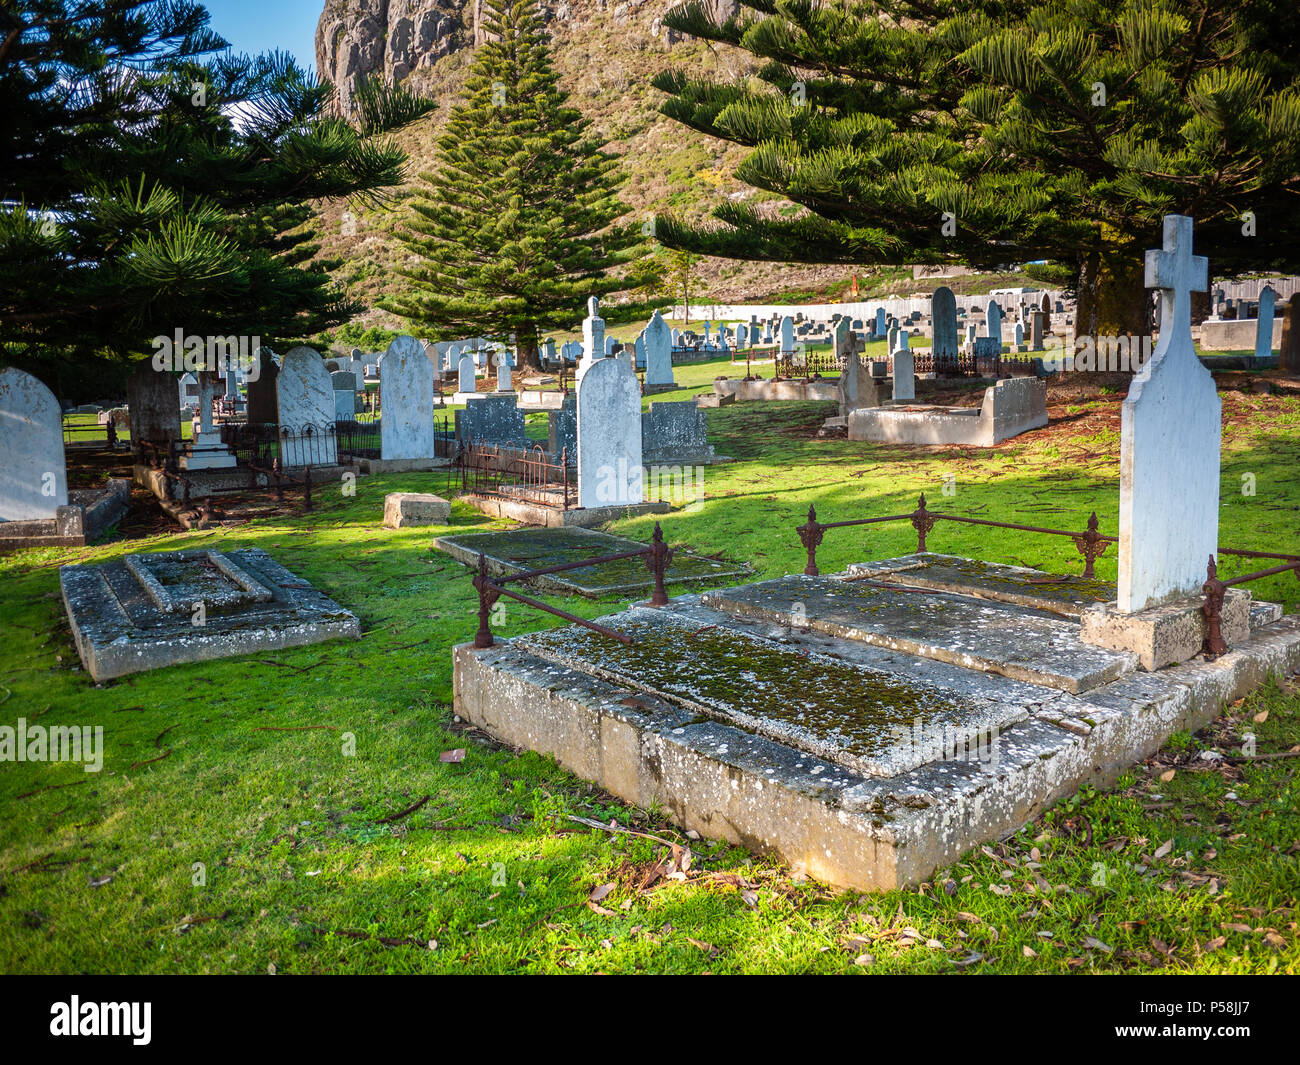 Tombstone and graves in graveyard. Old stone tombs in cemetery. Old Stanley Burial Ground, Town of Stanley, Tasmania, Australia Stock Photo